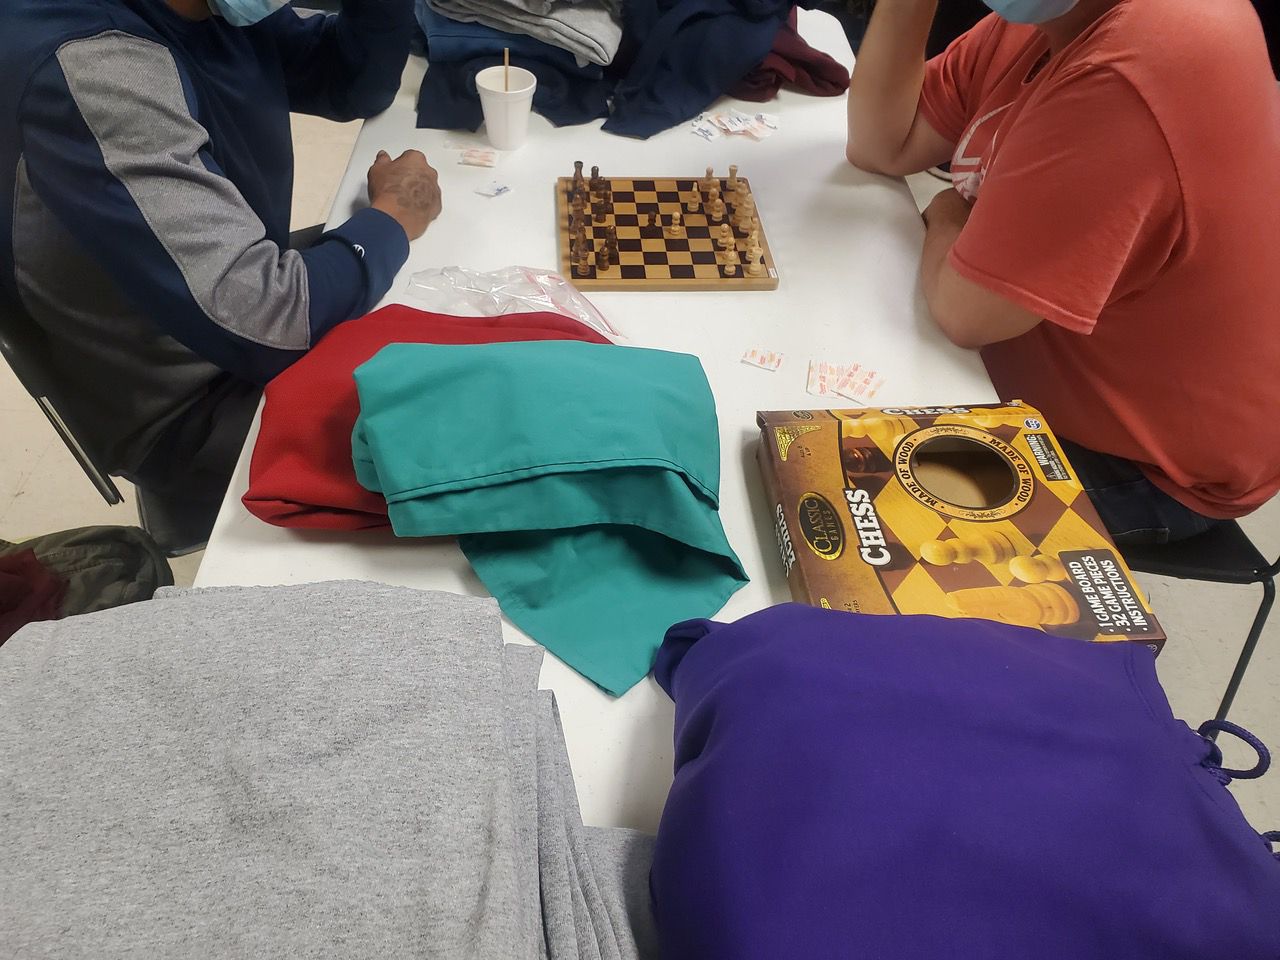 Guests at the Emergency Shelter of Northern Kentucky play a game of chess during an overnight stay. (Provided)